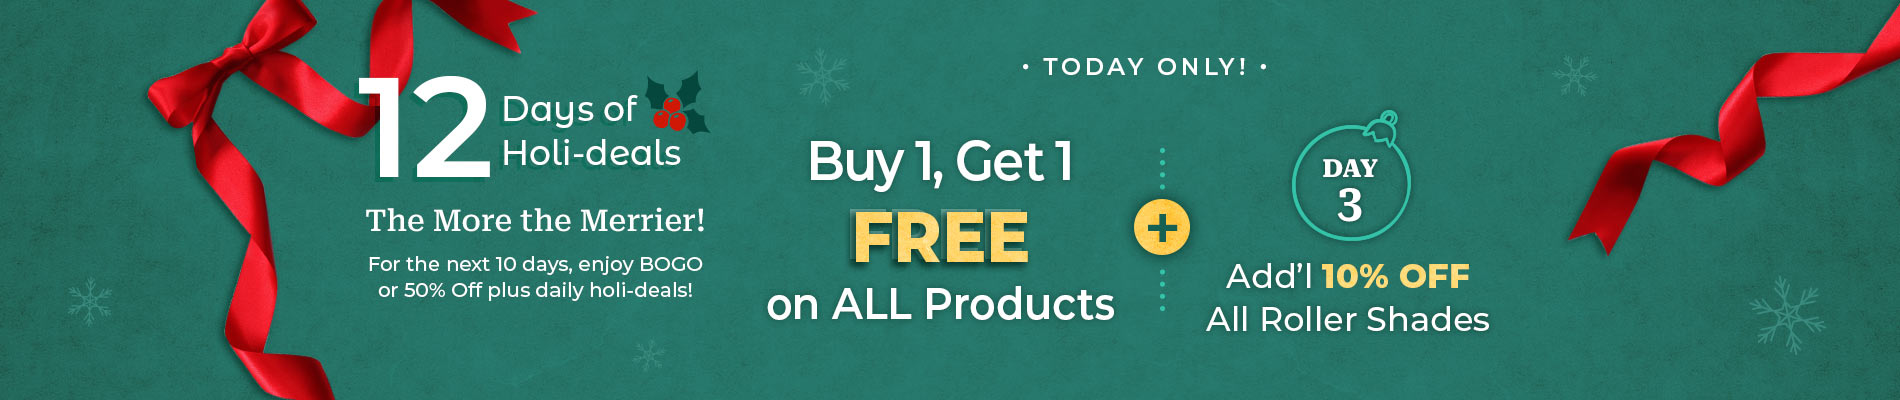 Buy 1, Get 1 FREE on All Products